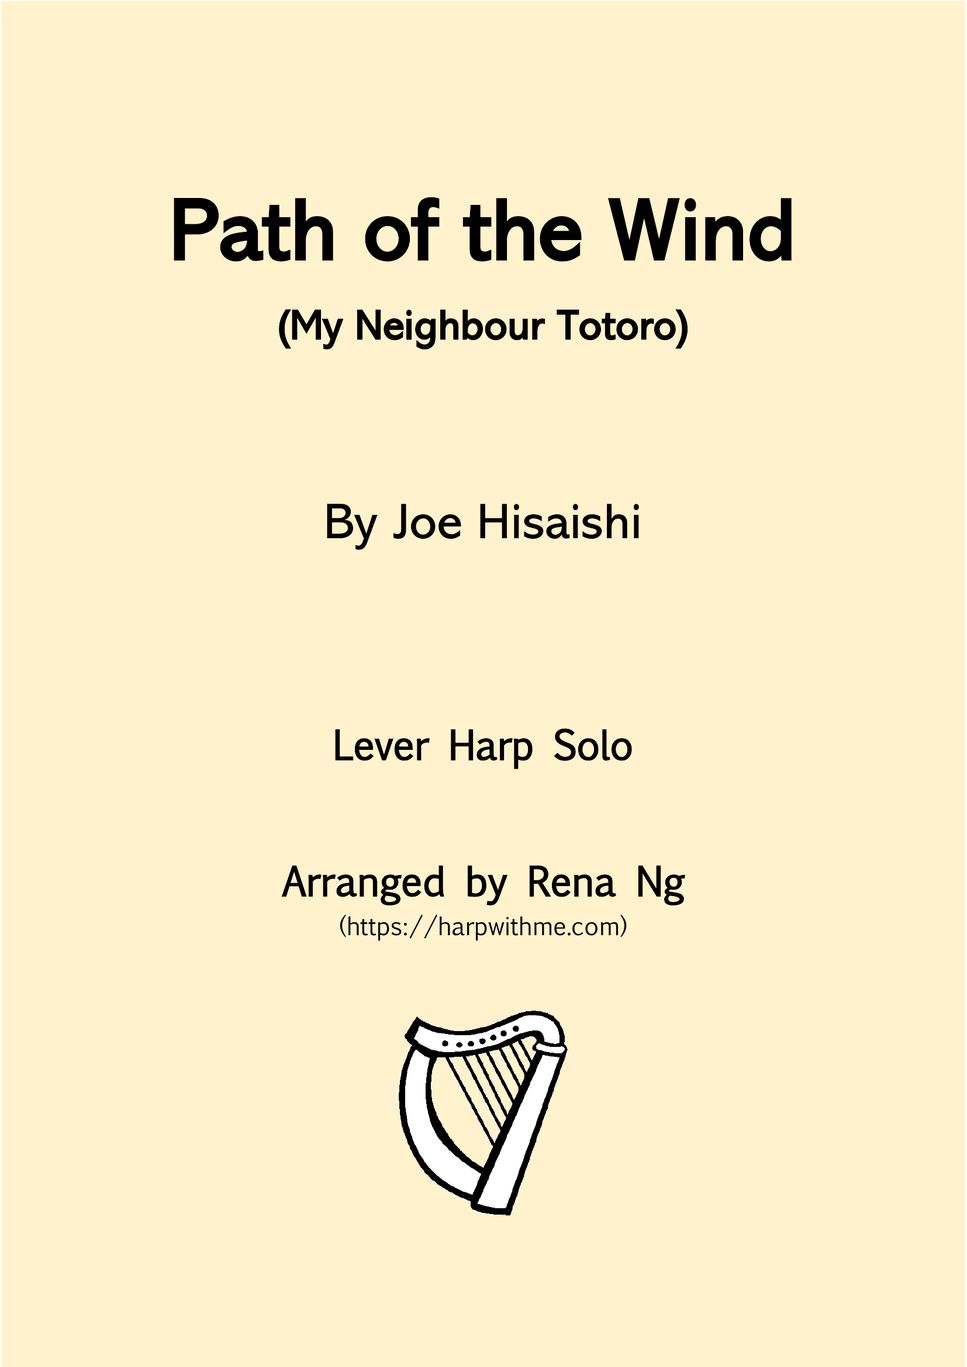 Joe Hisaishi - Path of the Wind (Lever Harp Solo) by Harp With Me